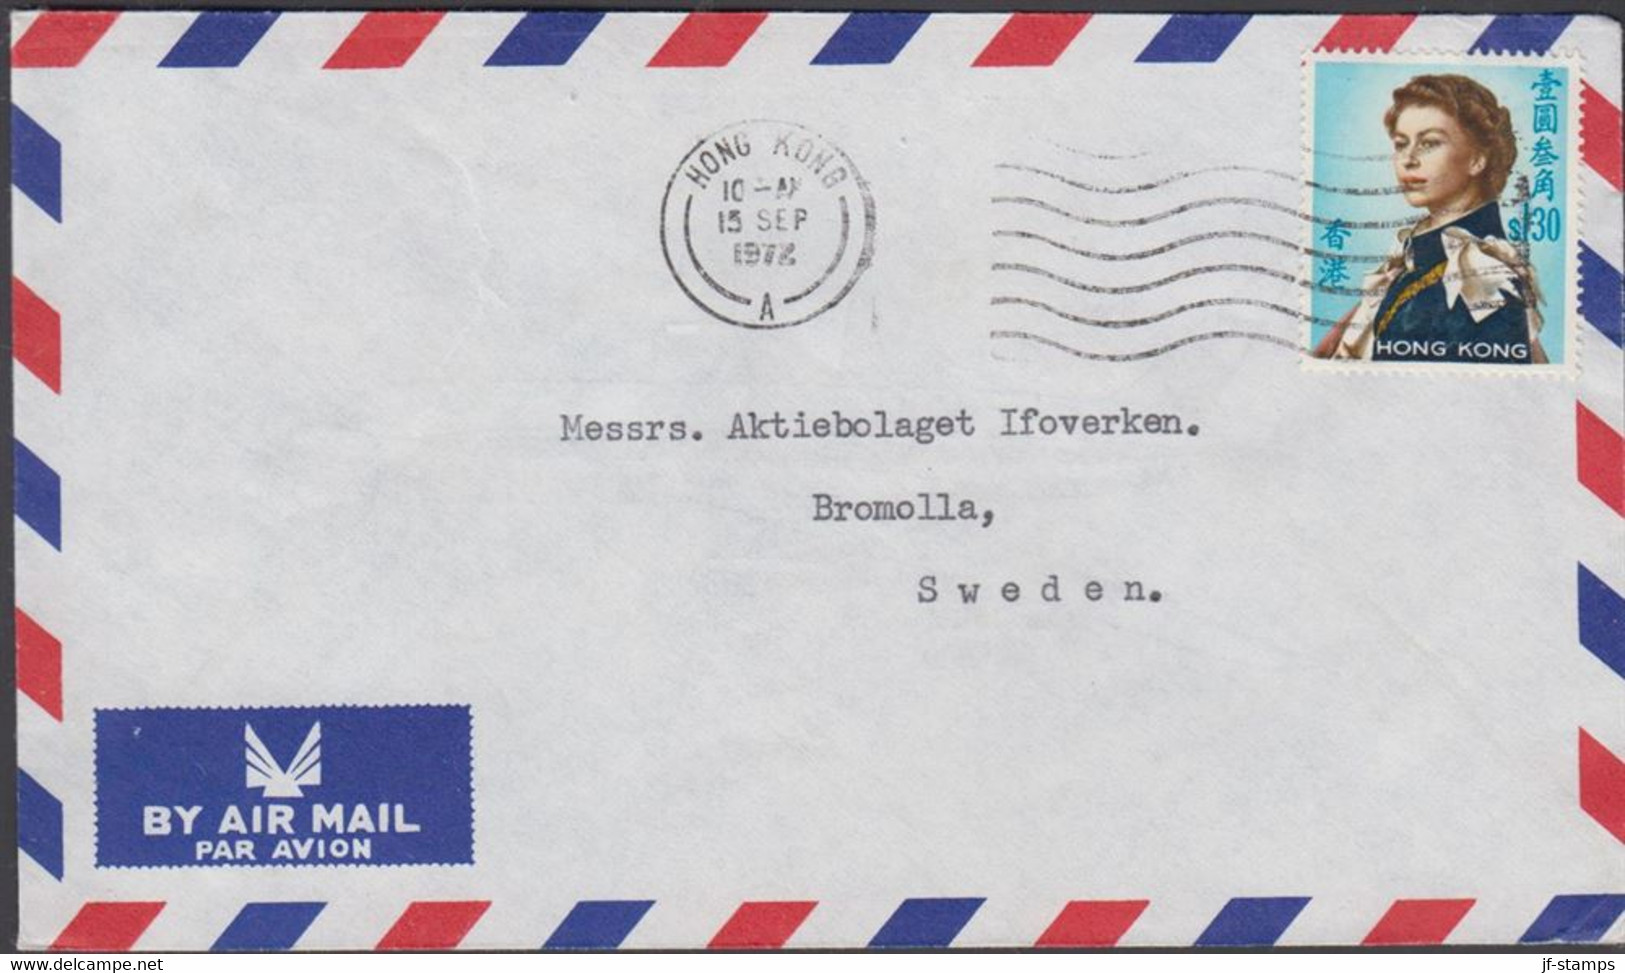 1972. HONG KONG. Elizabeth $ 1.30 On AIR MAIL Cover To Bromolla, Sweden From HONG KONG 15 SEP... (Michel 206) - JF427084 - Covers & Documents